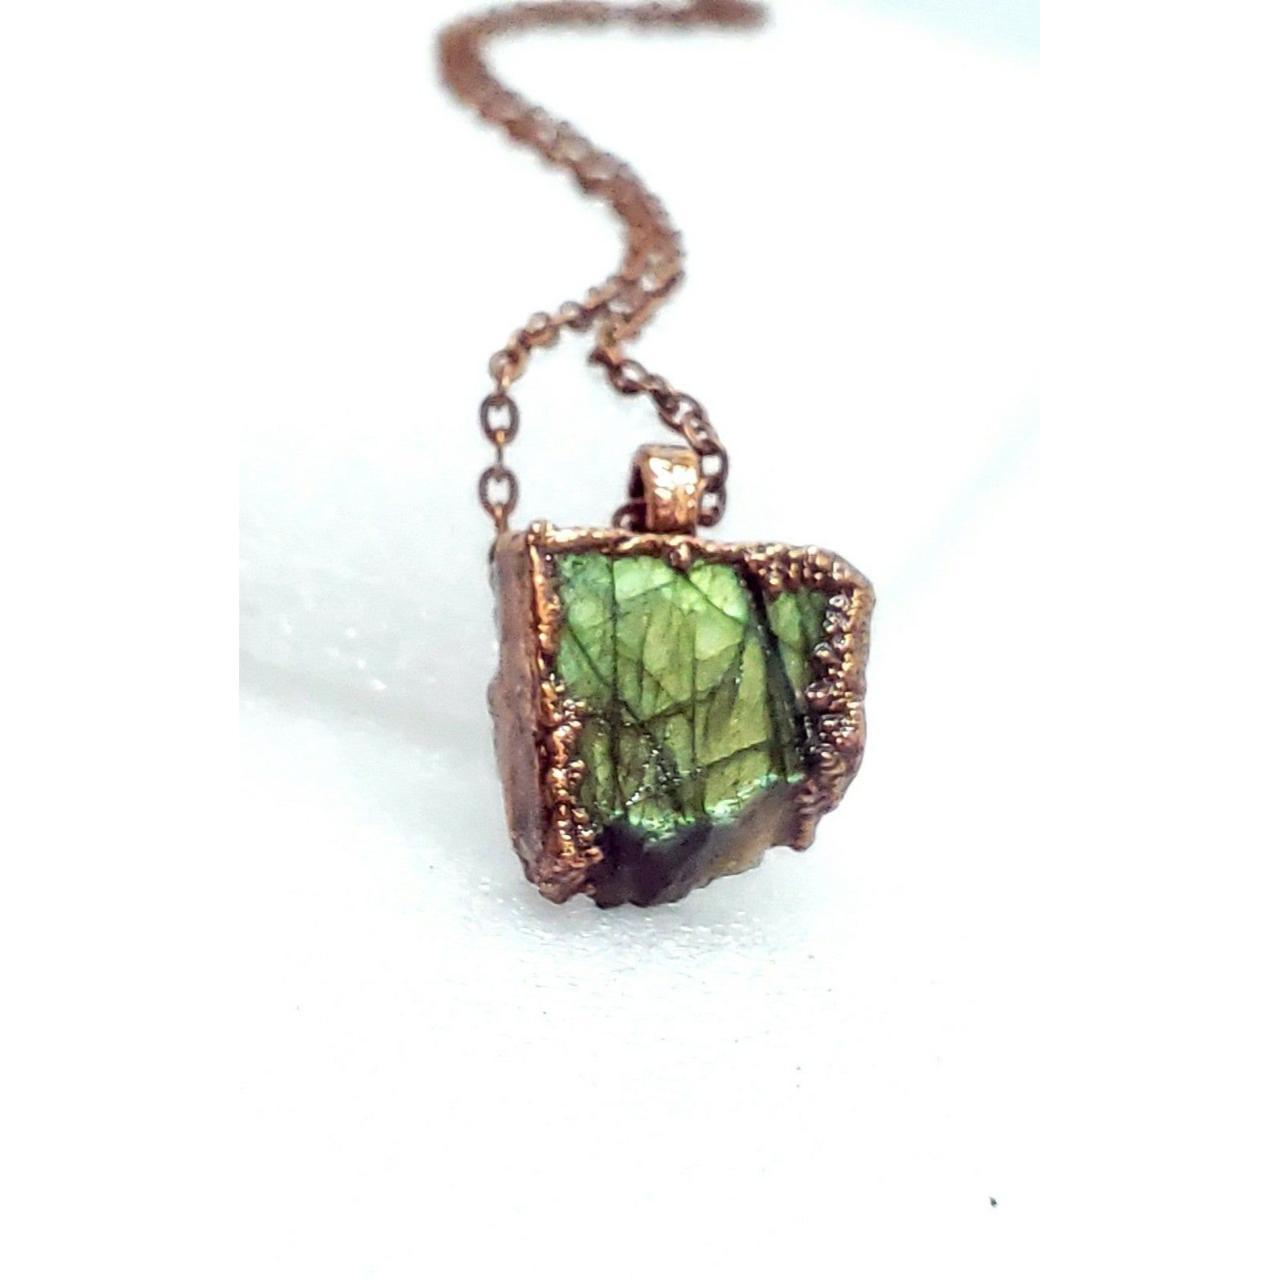 A bright green raw labradorite crystal that has been... - Depop